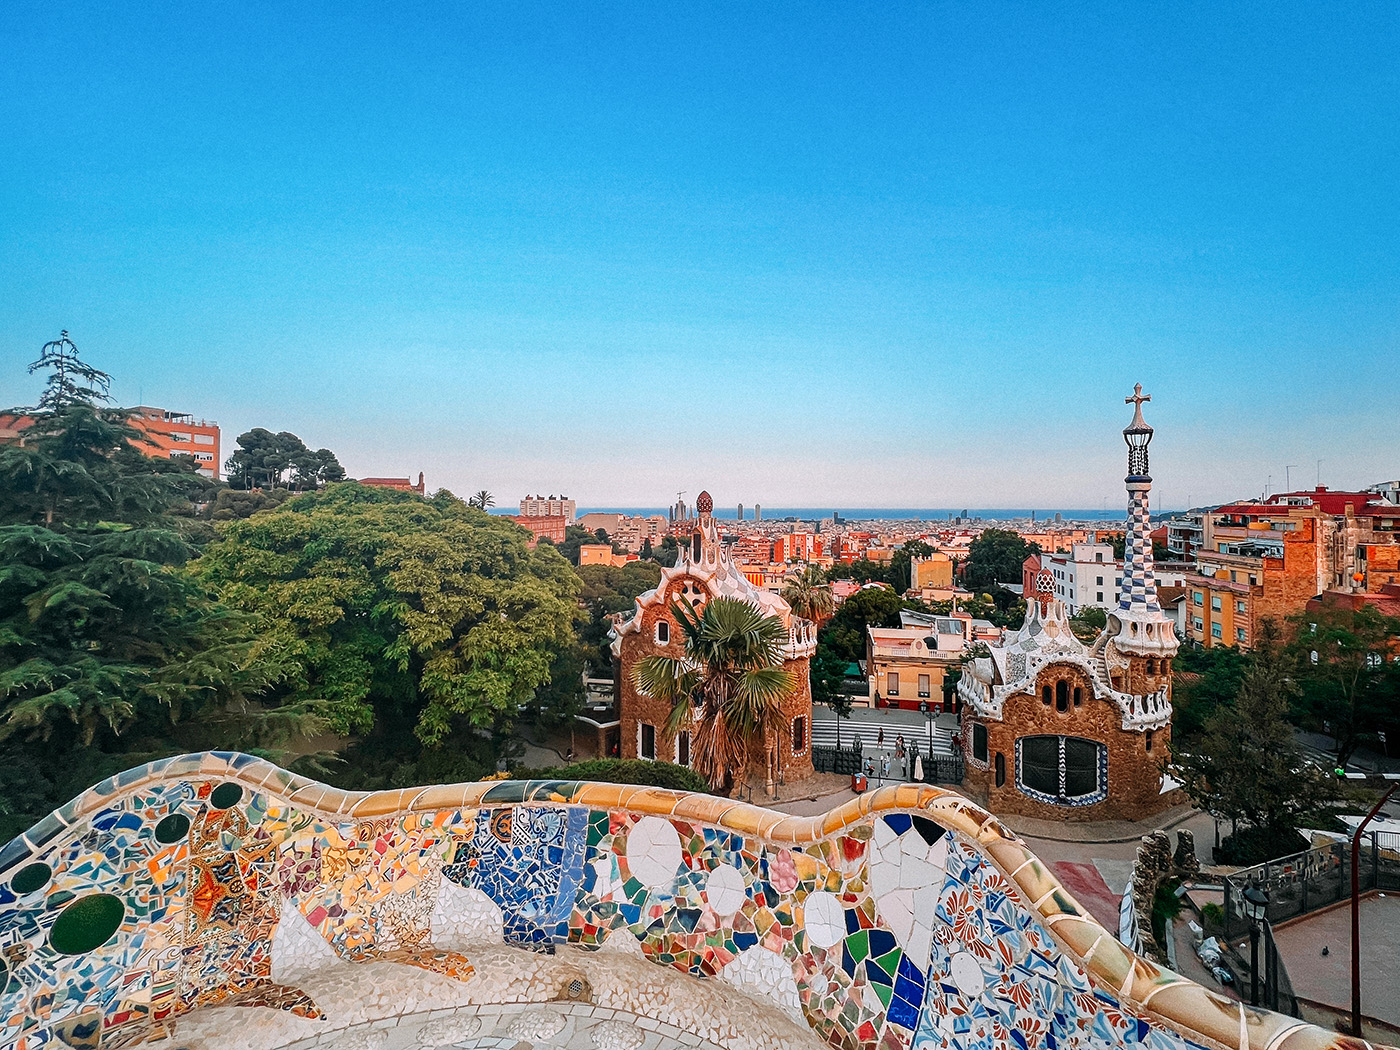 Visit Park Güell for colourful mosaics and views